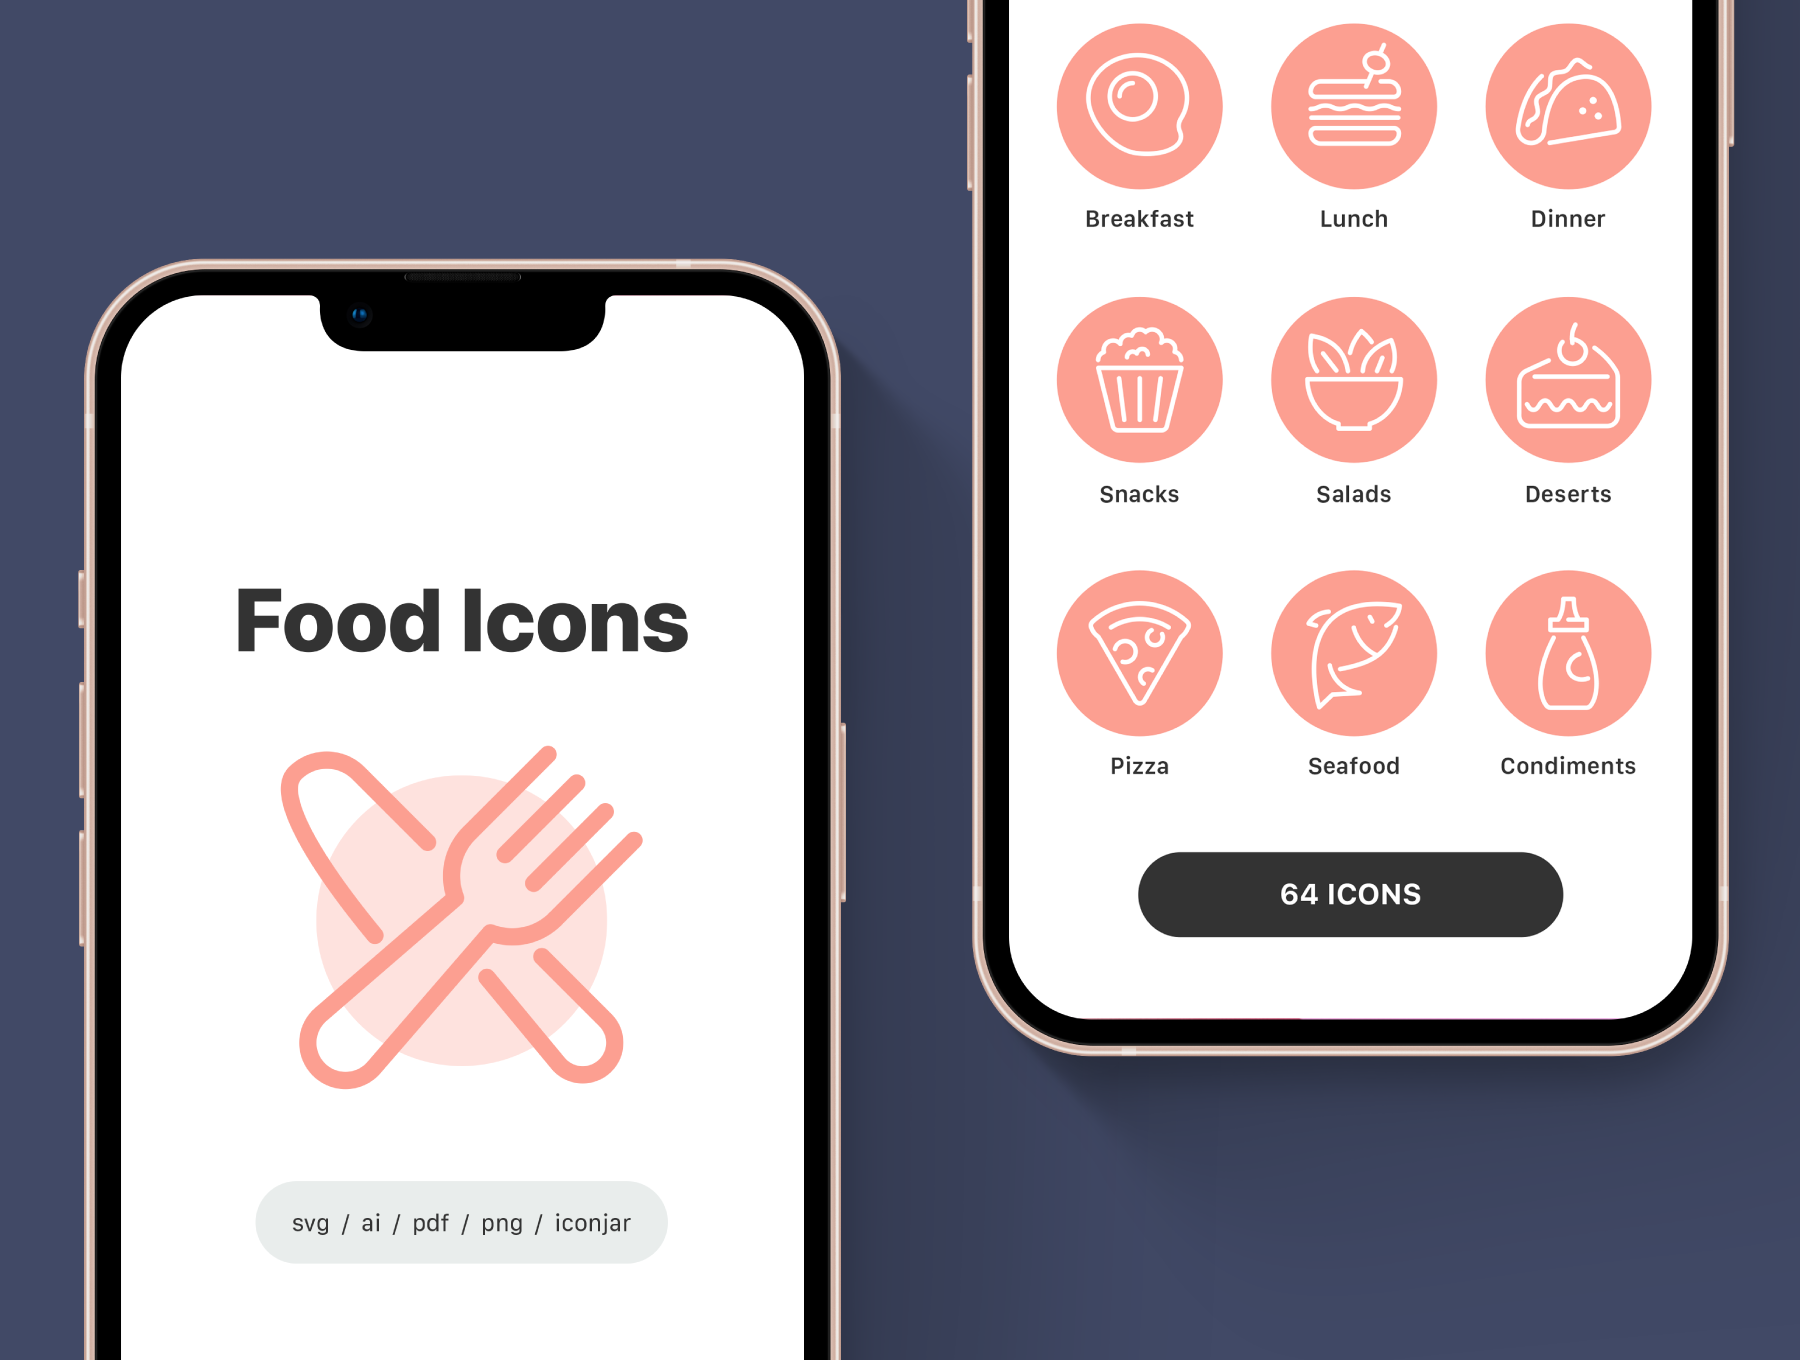 food-icons-vector-line-icon-set-7_1636477181243